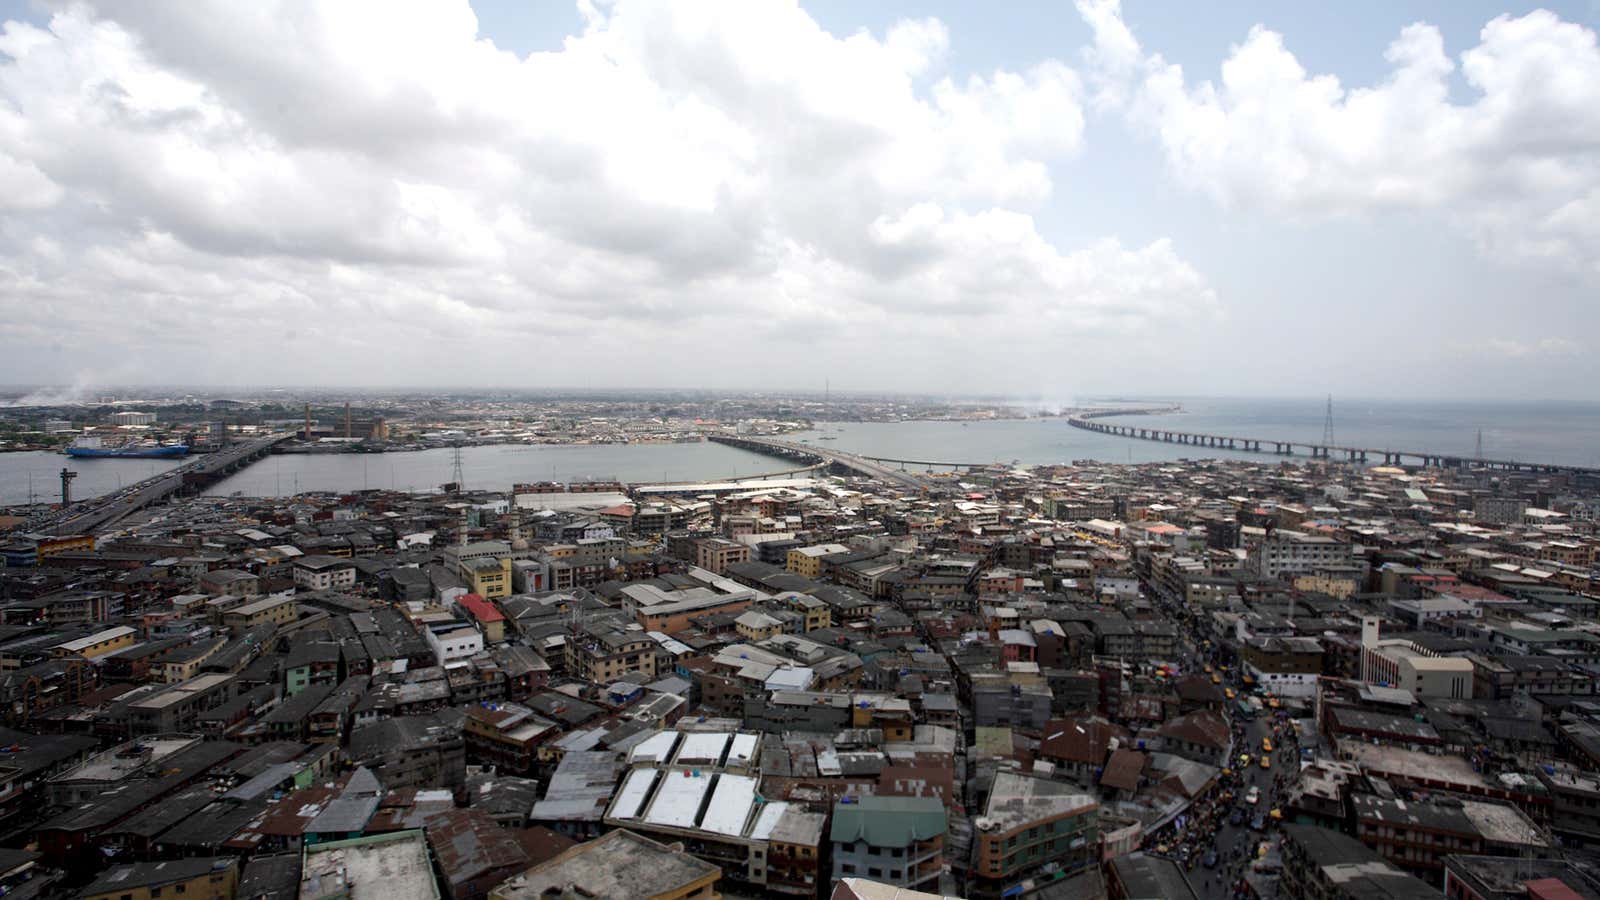 Always busy. An aerial view of Lagos